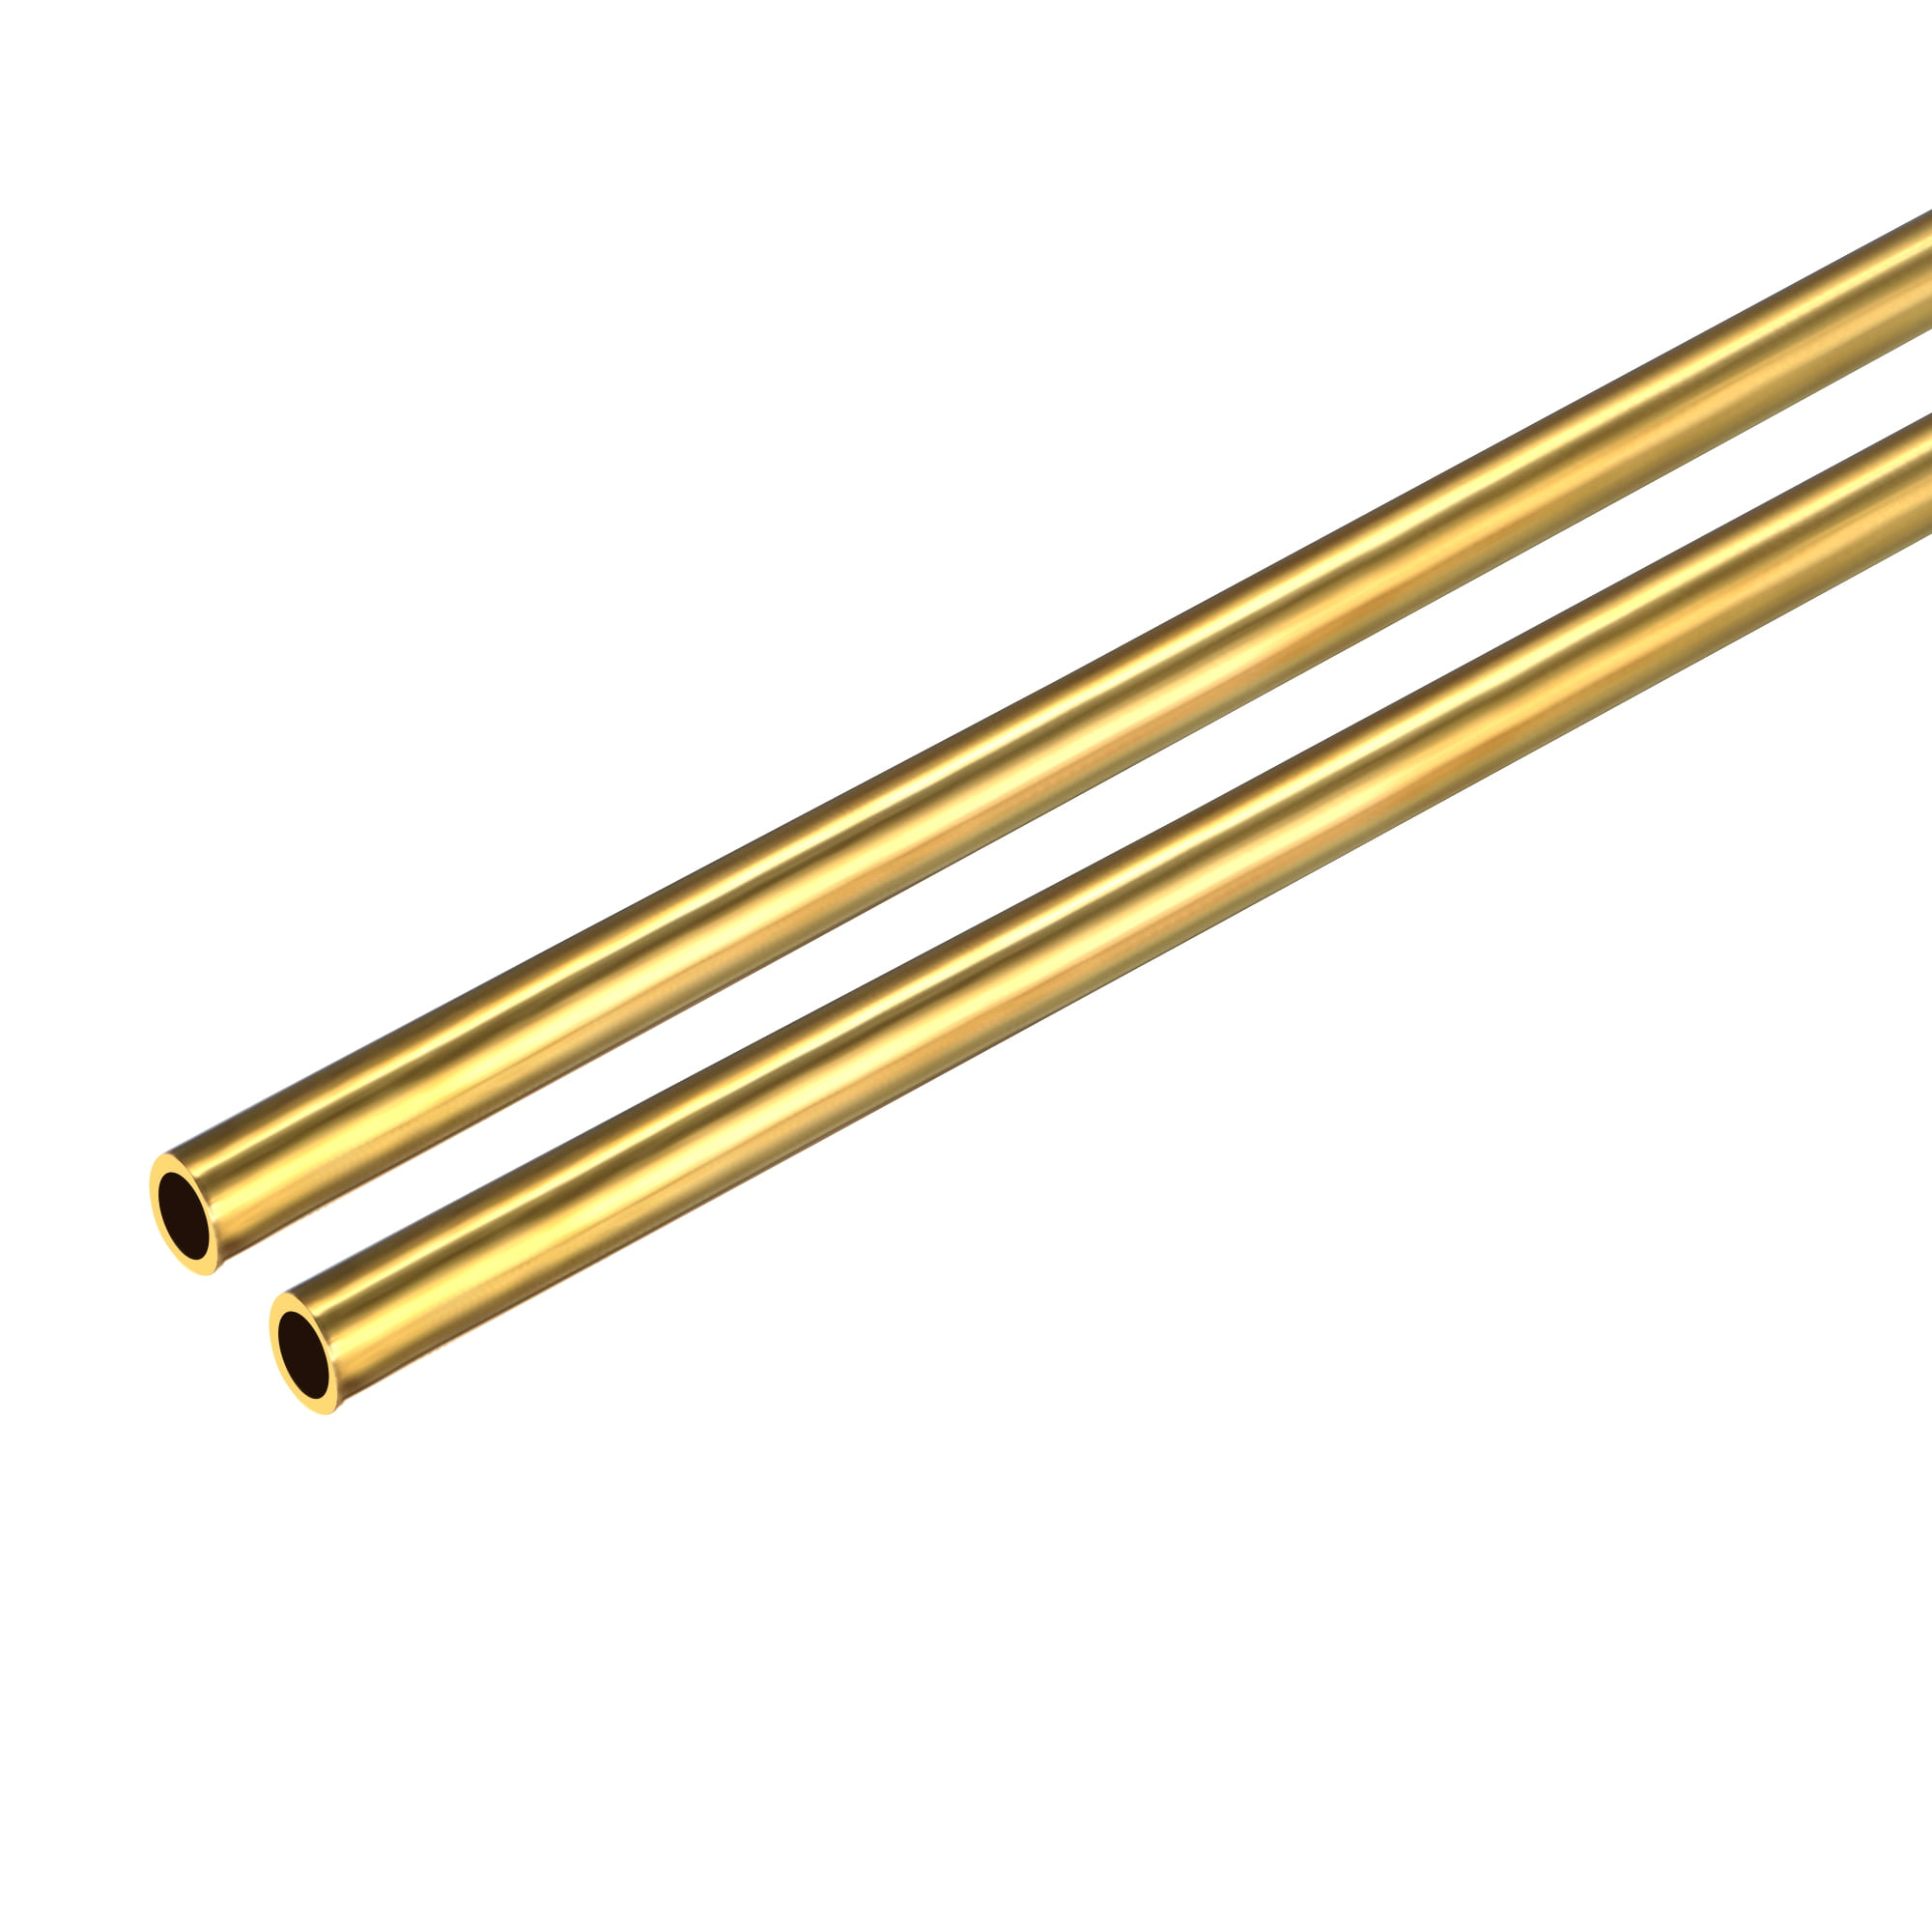 uxcell 1mm x 3mm x 500mm Brass Pipe Tube Round Bar Rod for RC Boat 